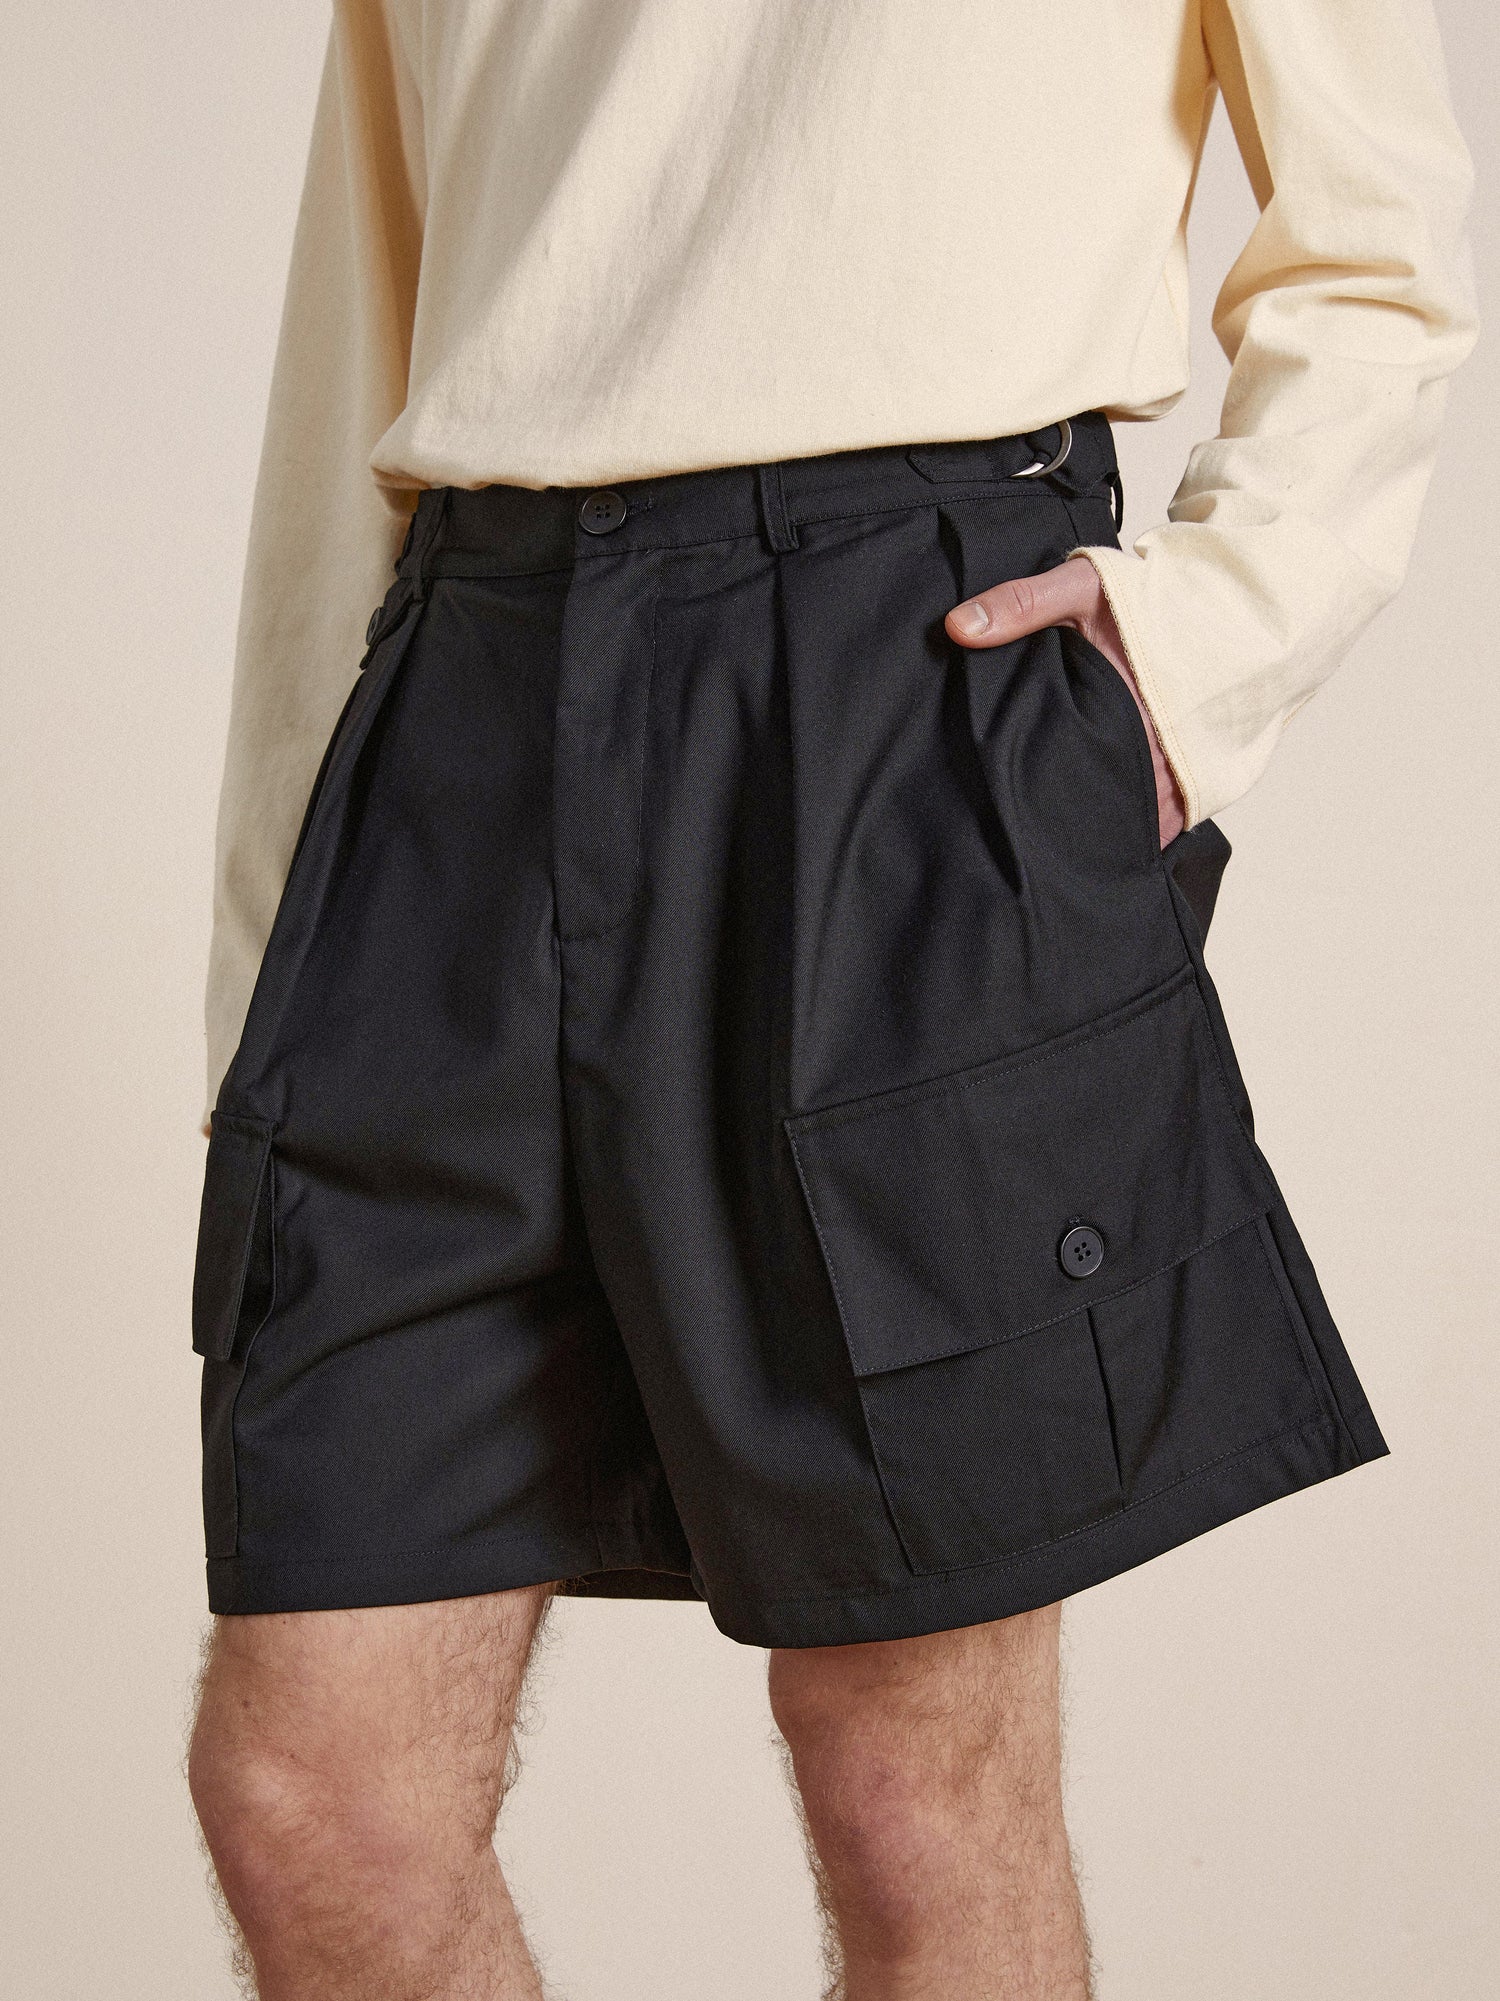 A person wearing a beige top and black Found Pleated Pocket Cargo Shorts stands with one hand in the pocket, focusing on the shorts' details and design.